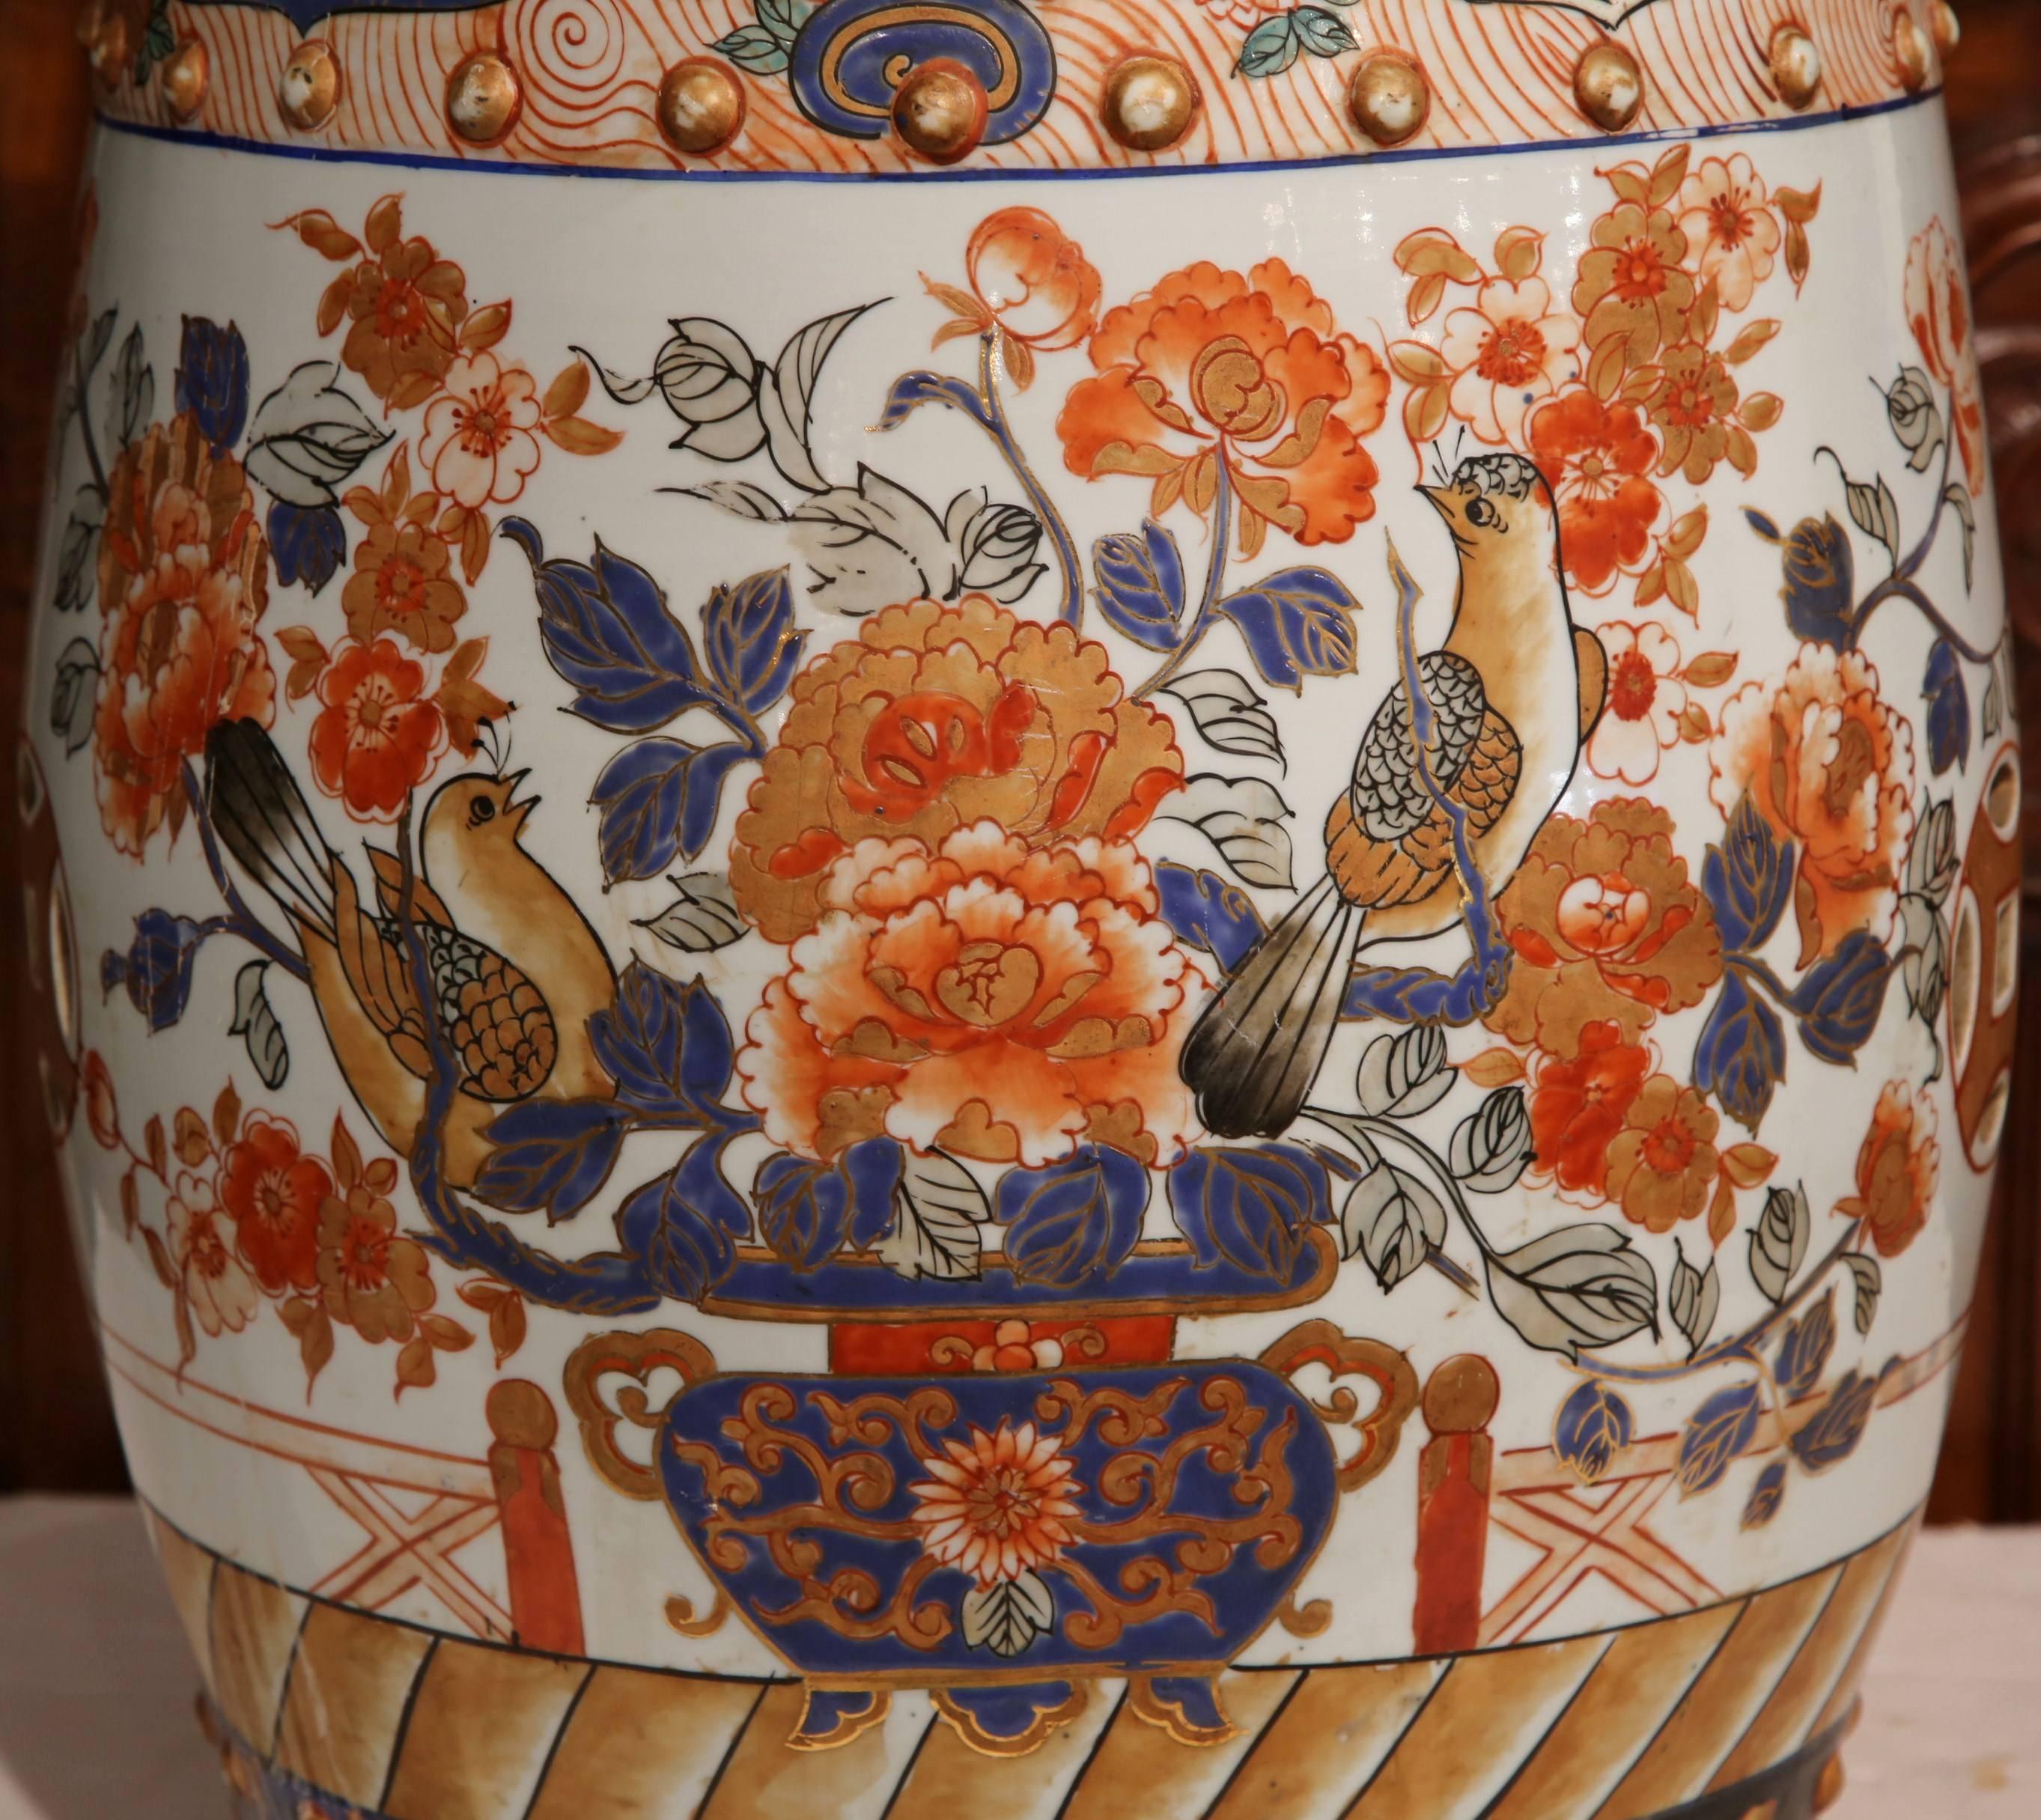 This antique porcelain garden seat was found in France, but created in Japan, circa 1870. The ornate ceramic piece features hand-painted scenes of flowers and birds with unmistakable oriental flair. The stool has a varied palette of navy blue,